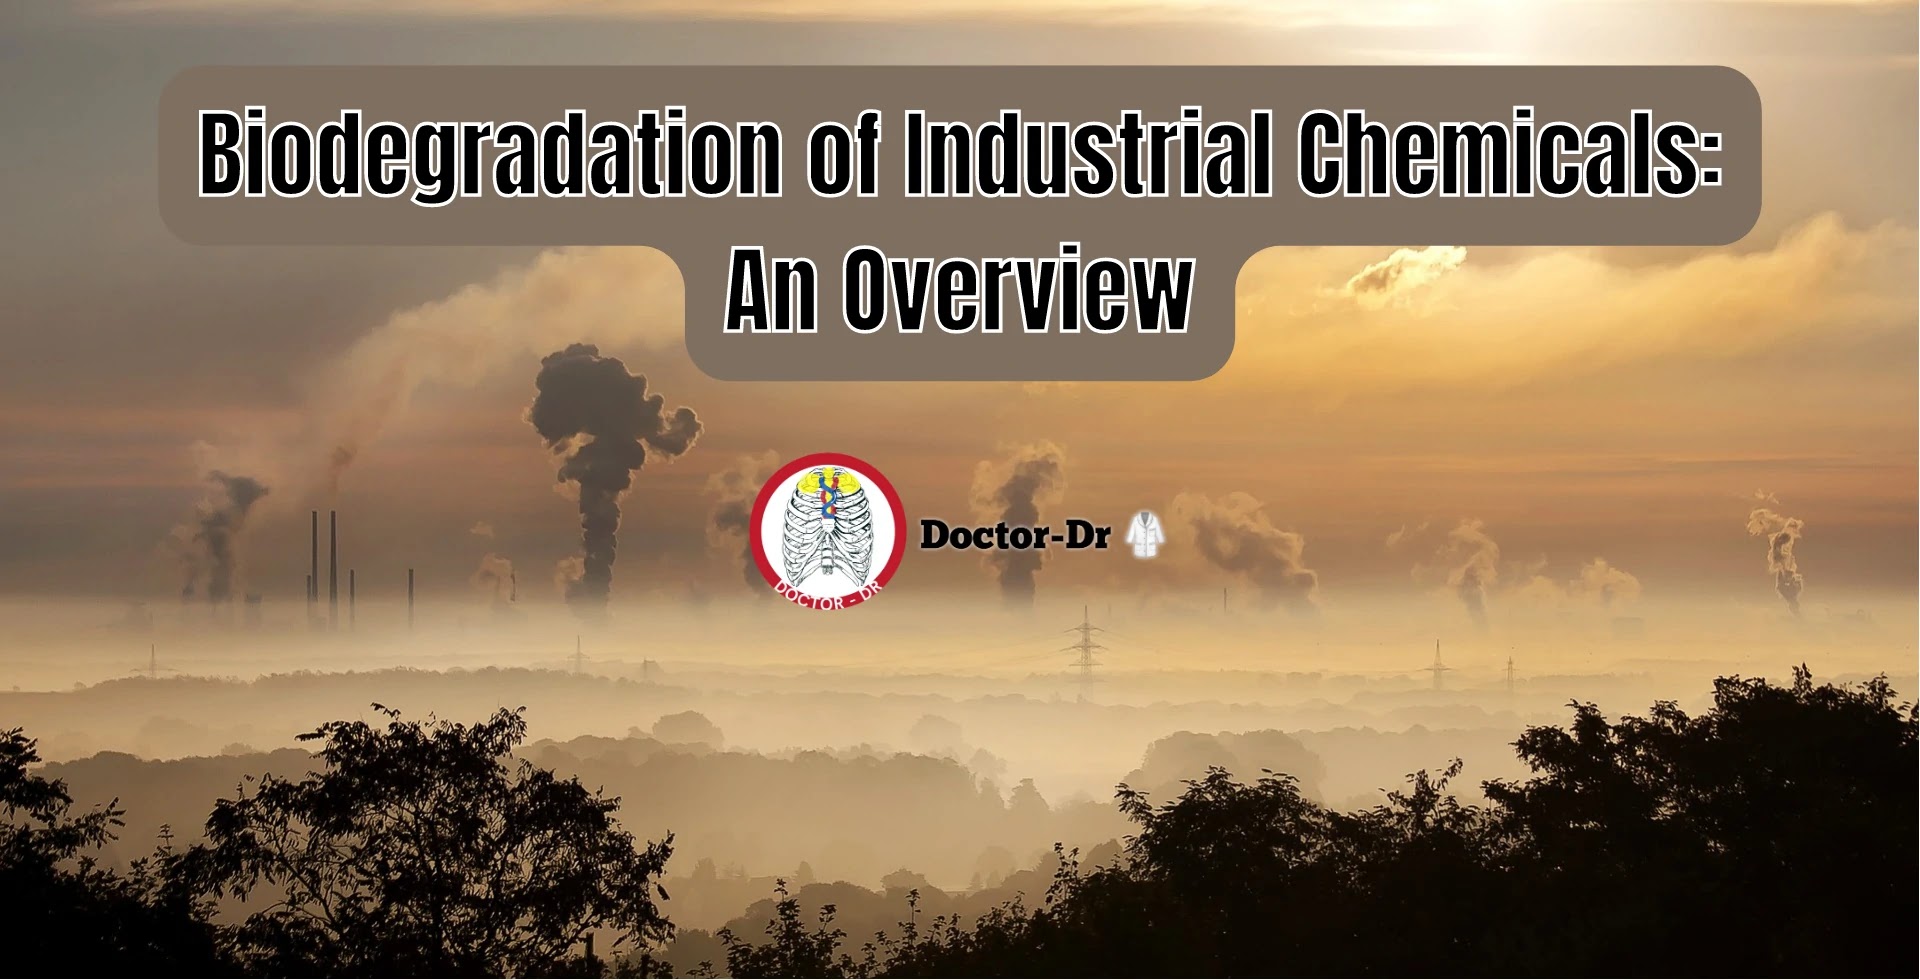 Biodegradation of Industrial Chemicals: An Overview